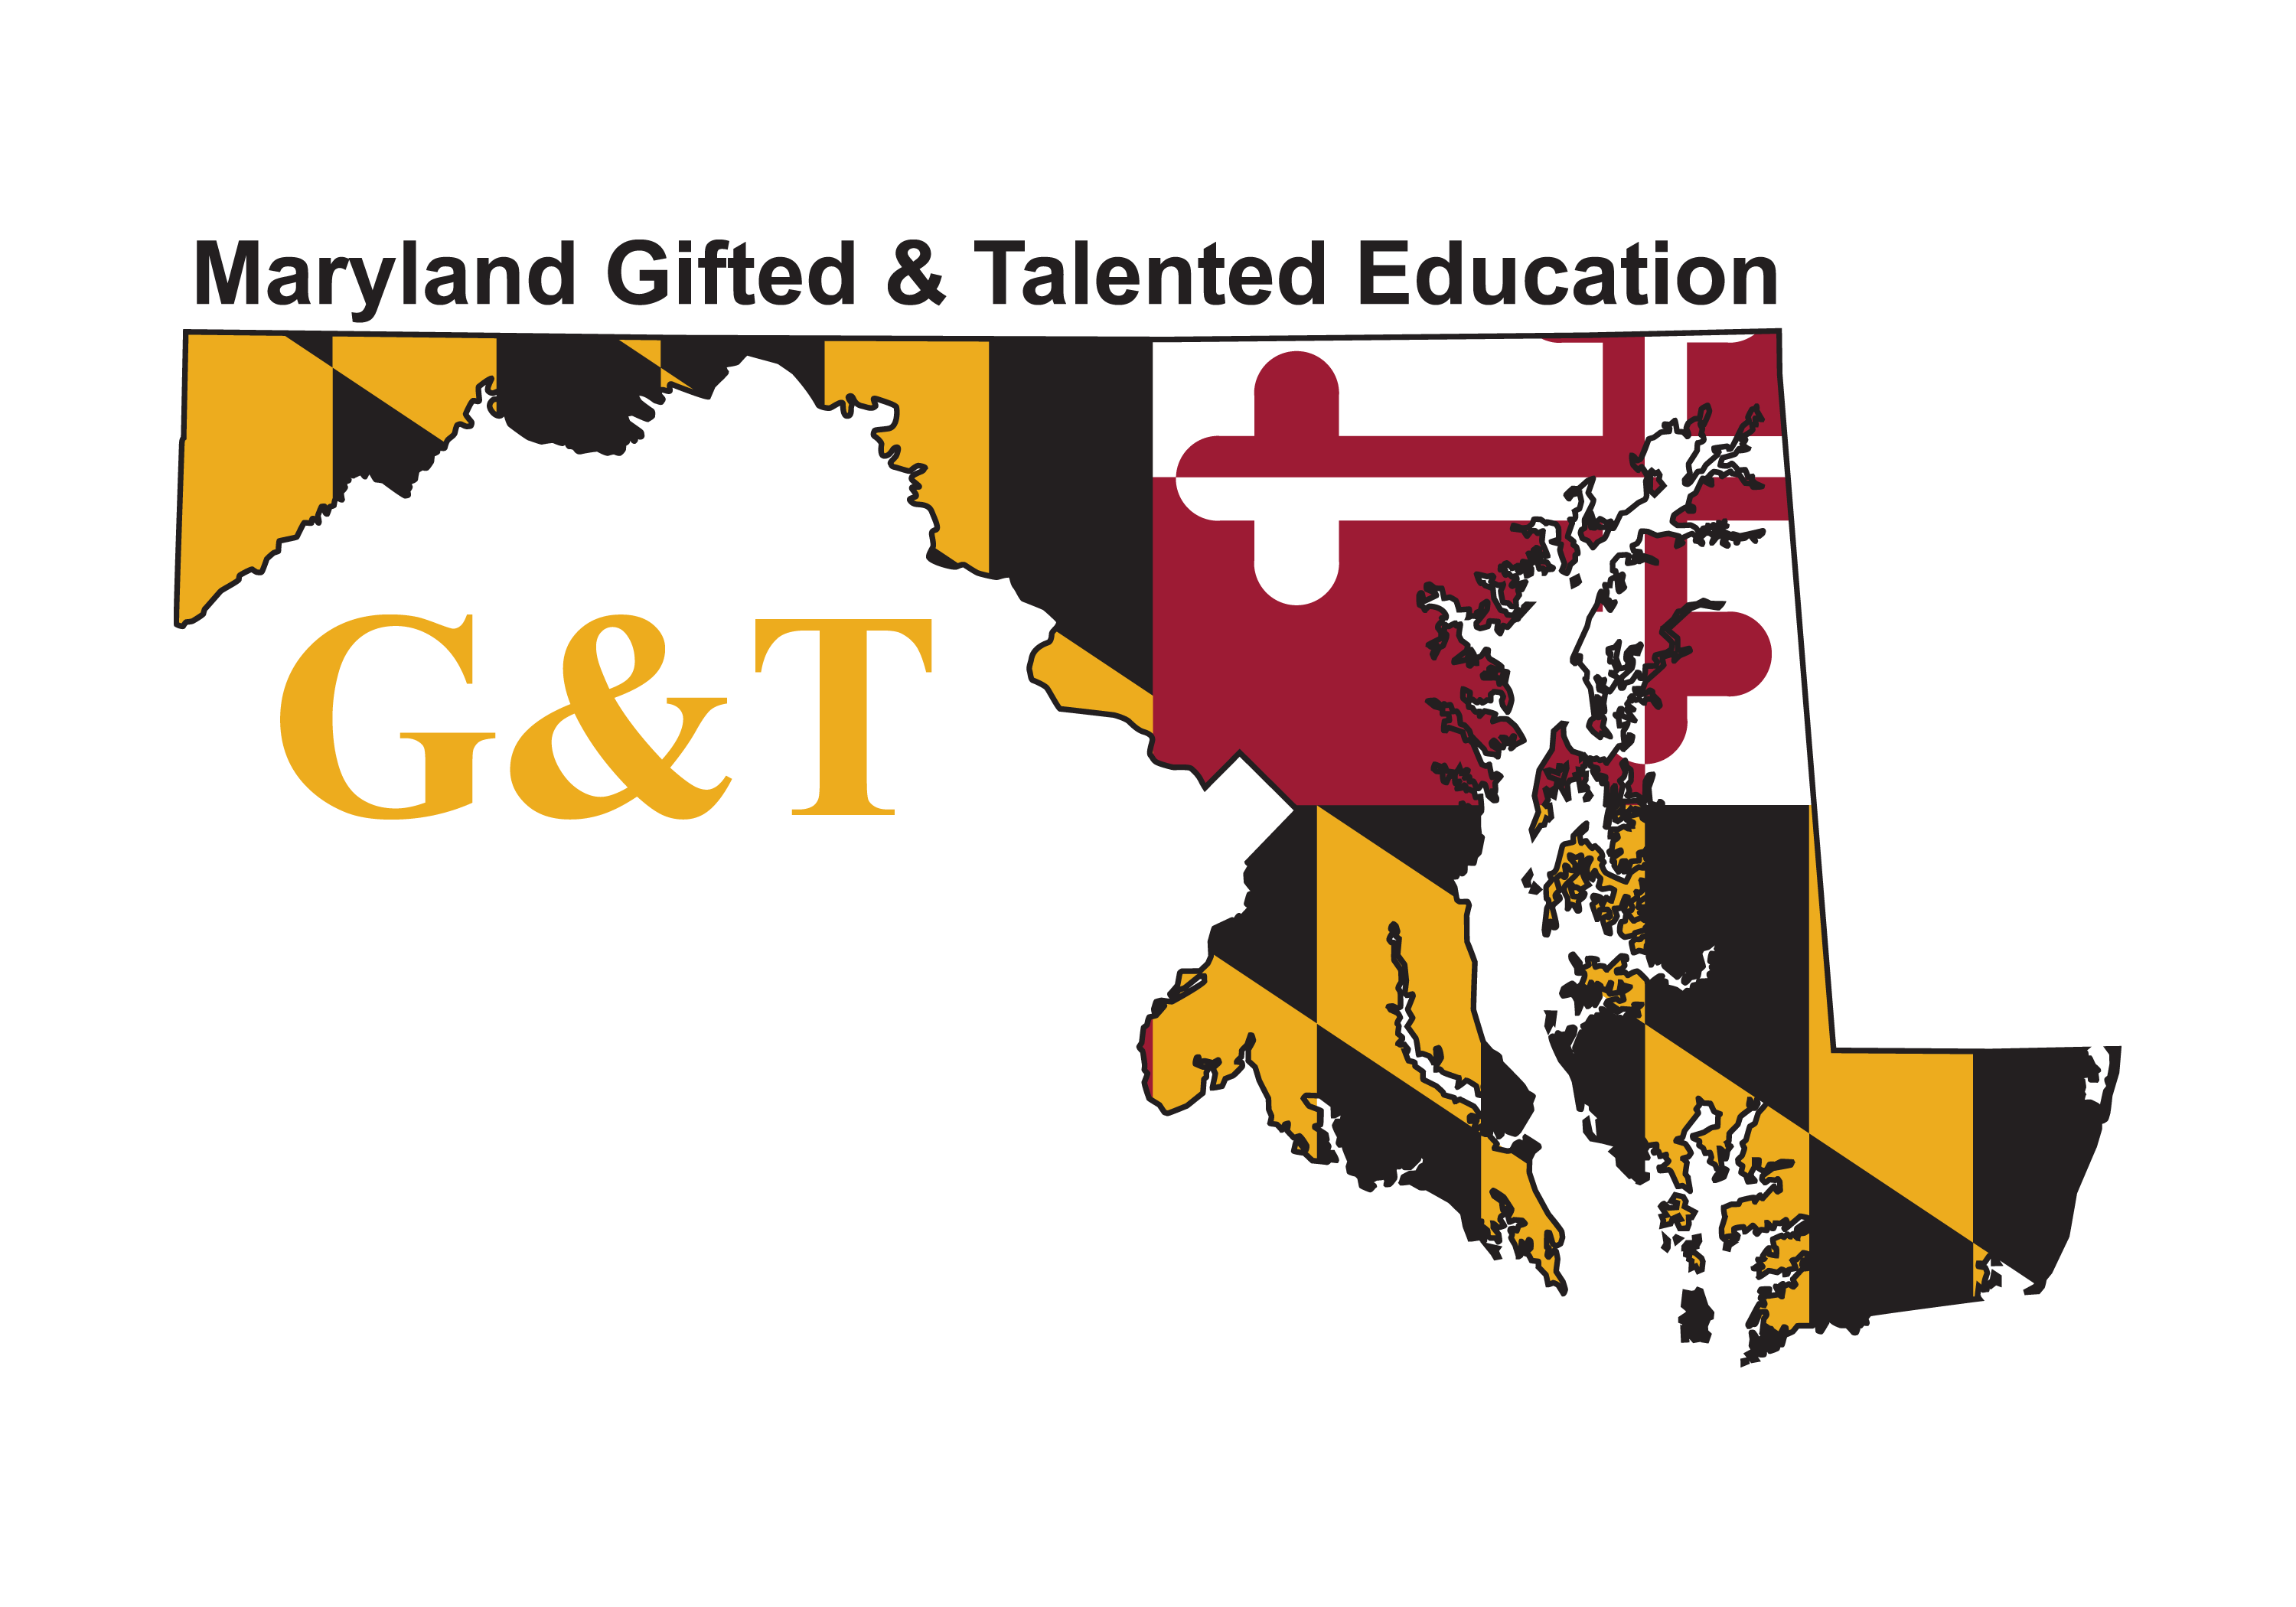 Maryland Gifted & Talented Education